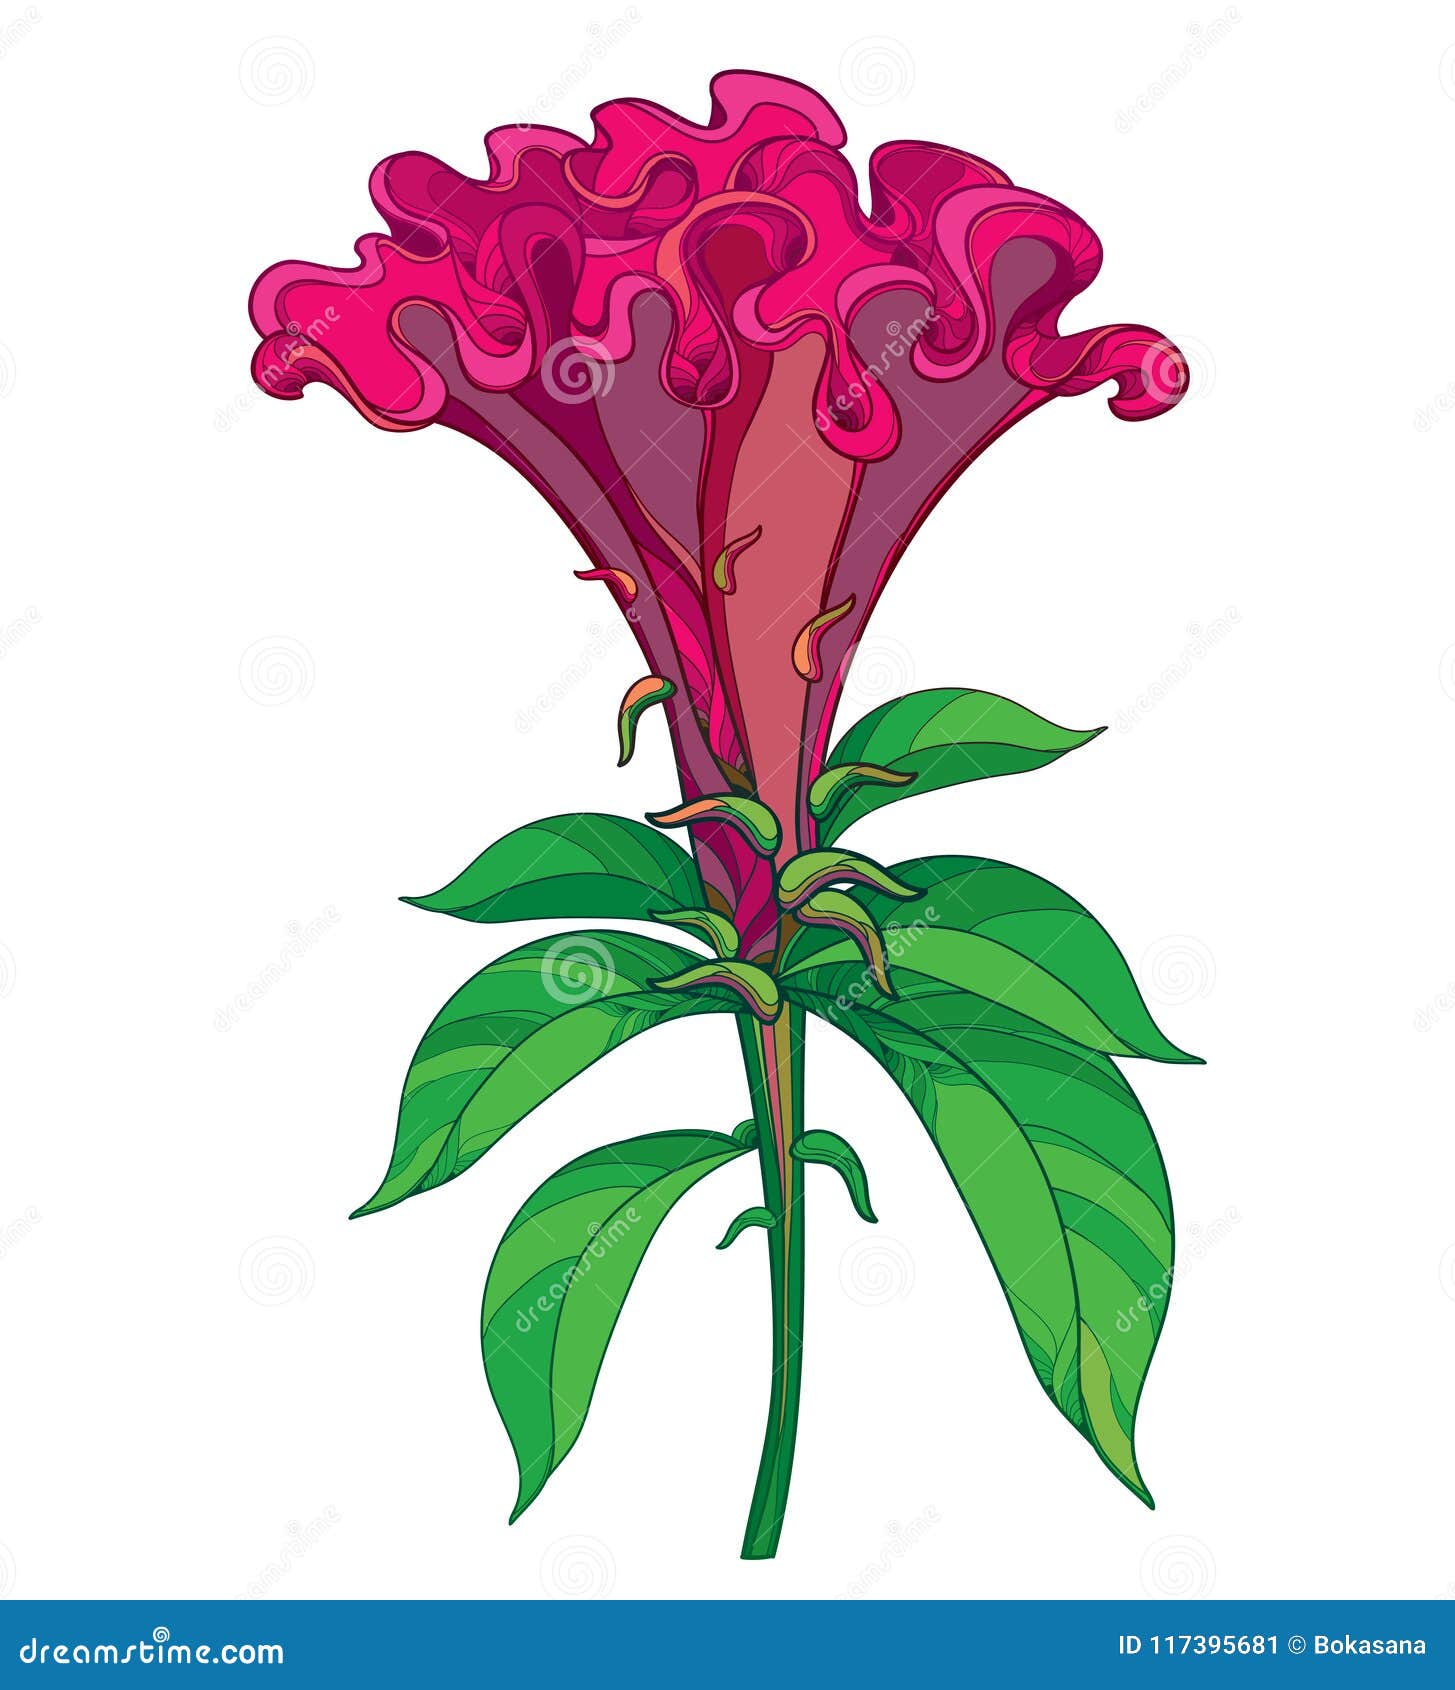  outline red celosia crisrtata or cockscomb flower and ornate green leaves  on white background.